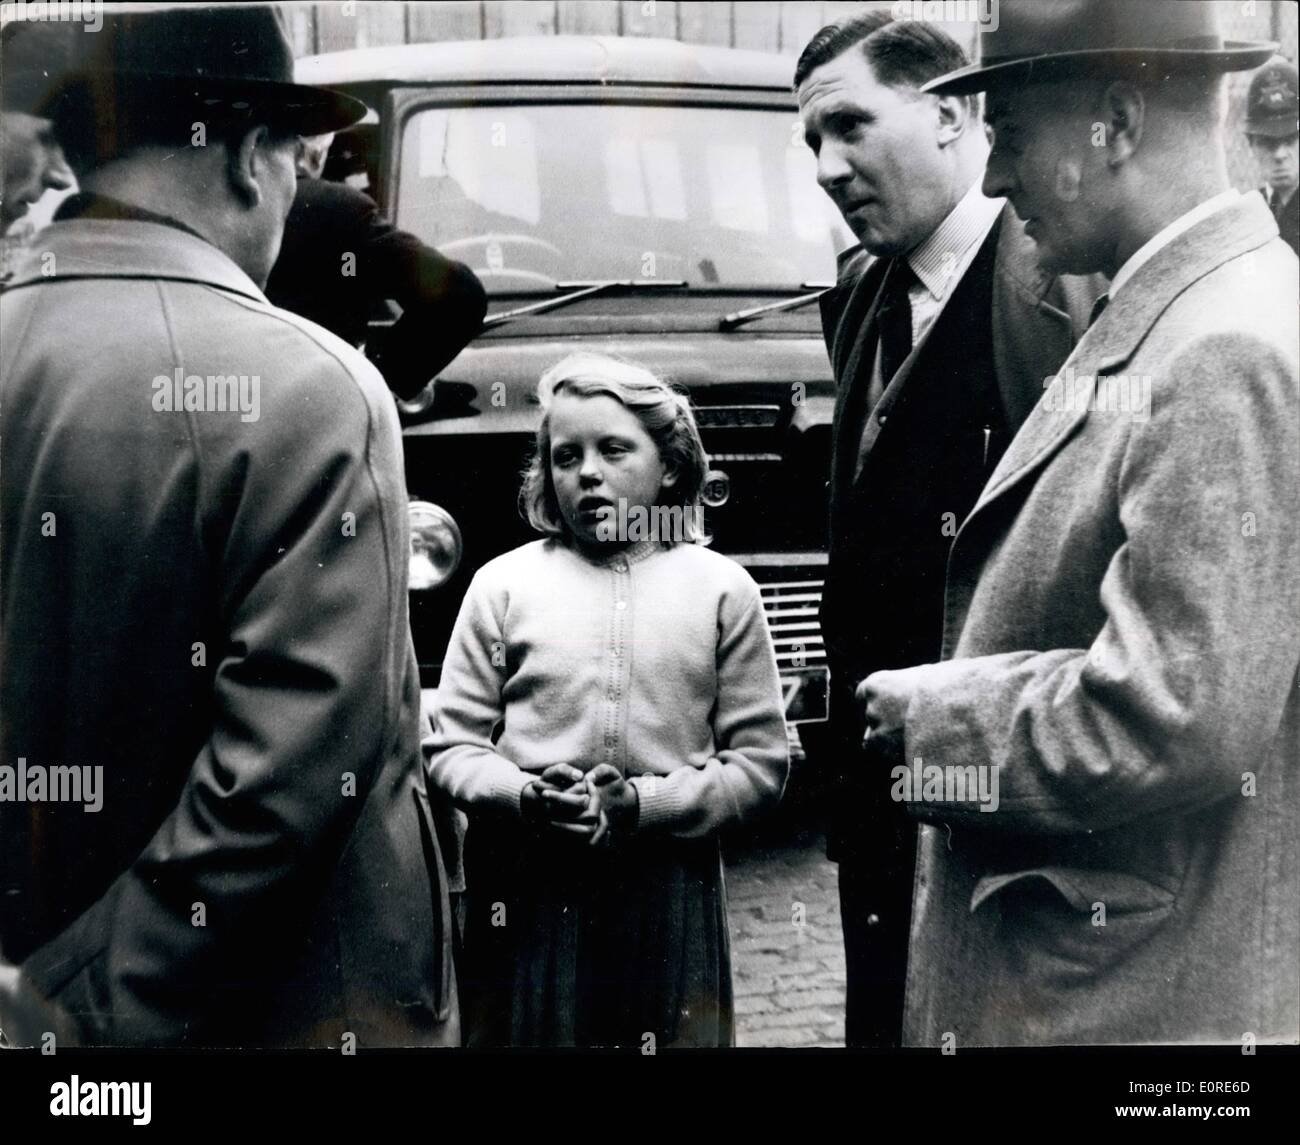 Apr. 04, 1959 - Ten-year-old Christine sees ,000 Mail Bag Robbery - and tells detectives all about it: Ten-year-old Christine Firestone was skipping her way home down a narrow, cobbled back street in Marylebone yesterday when she saw five masked men ambush a post office mail van. she saw the bandits drag out the driver and his mate, and then escape in a car with three begs full of registered packet containing ,000. Then fair-haired Christine told detectives all about it Stock Photo